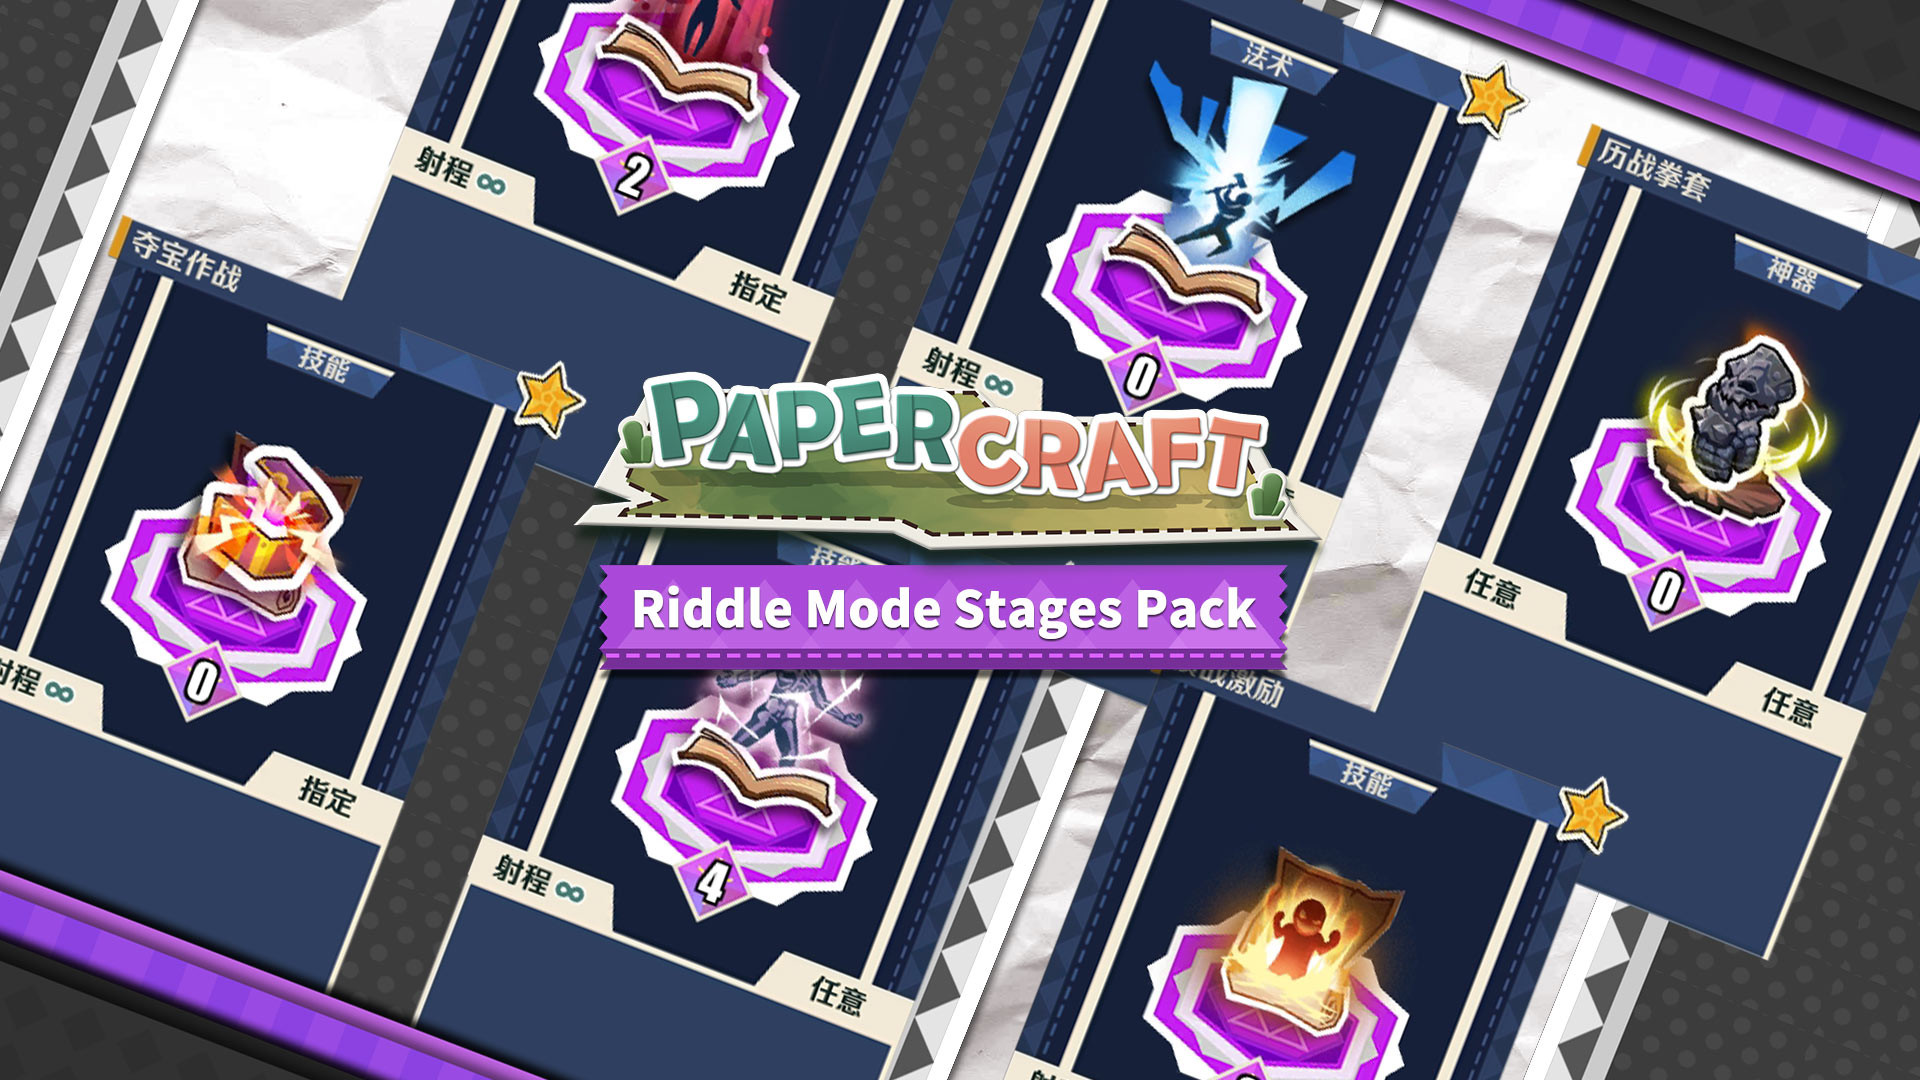 Papercraft:Riddle Mode stages pack （谜题模式关卡包） Featured Screenshot #1